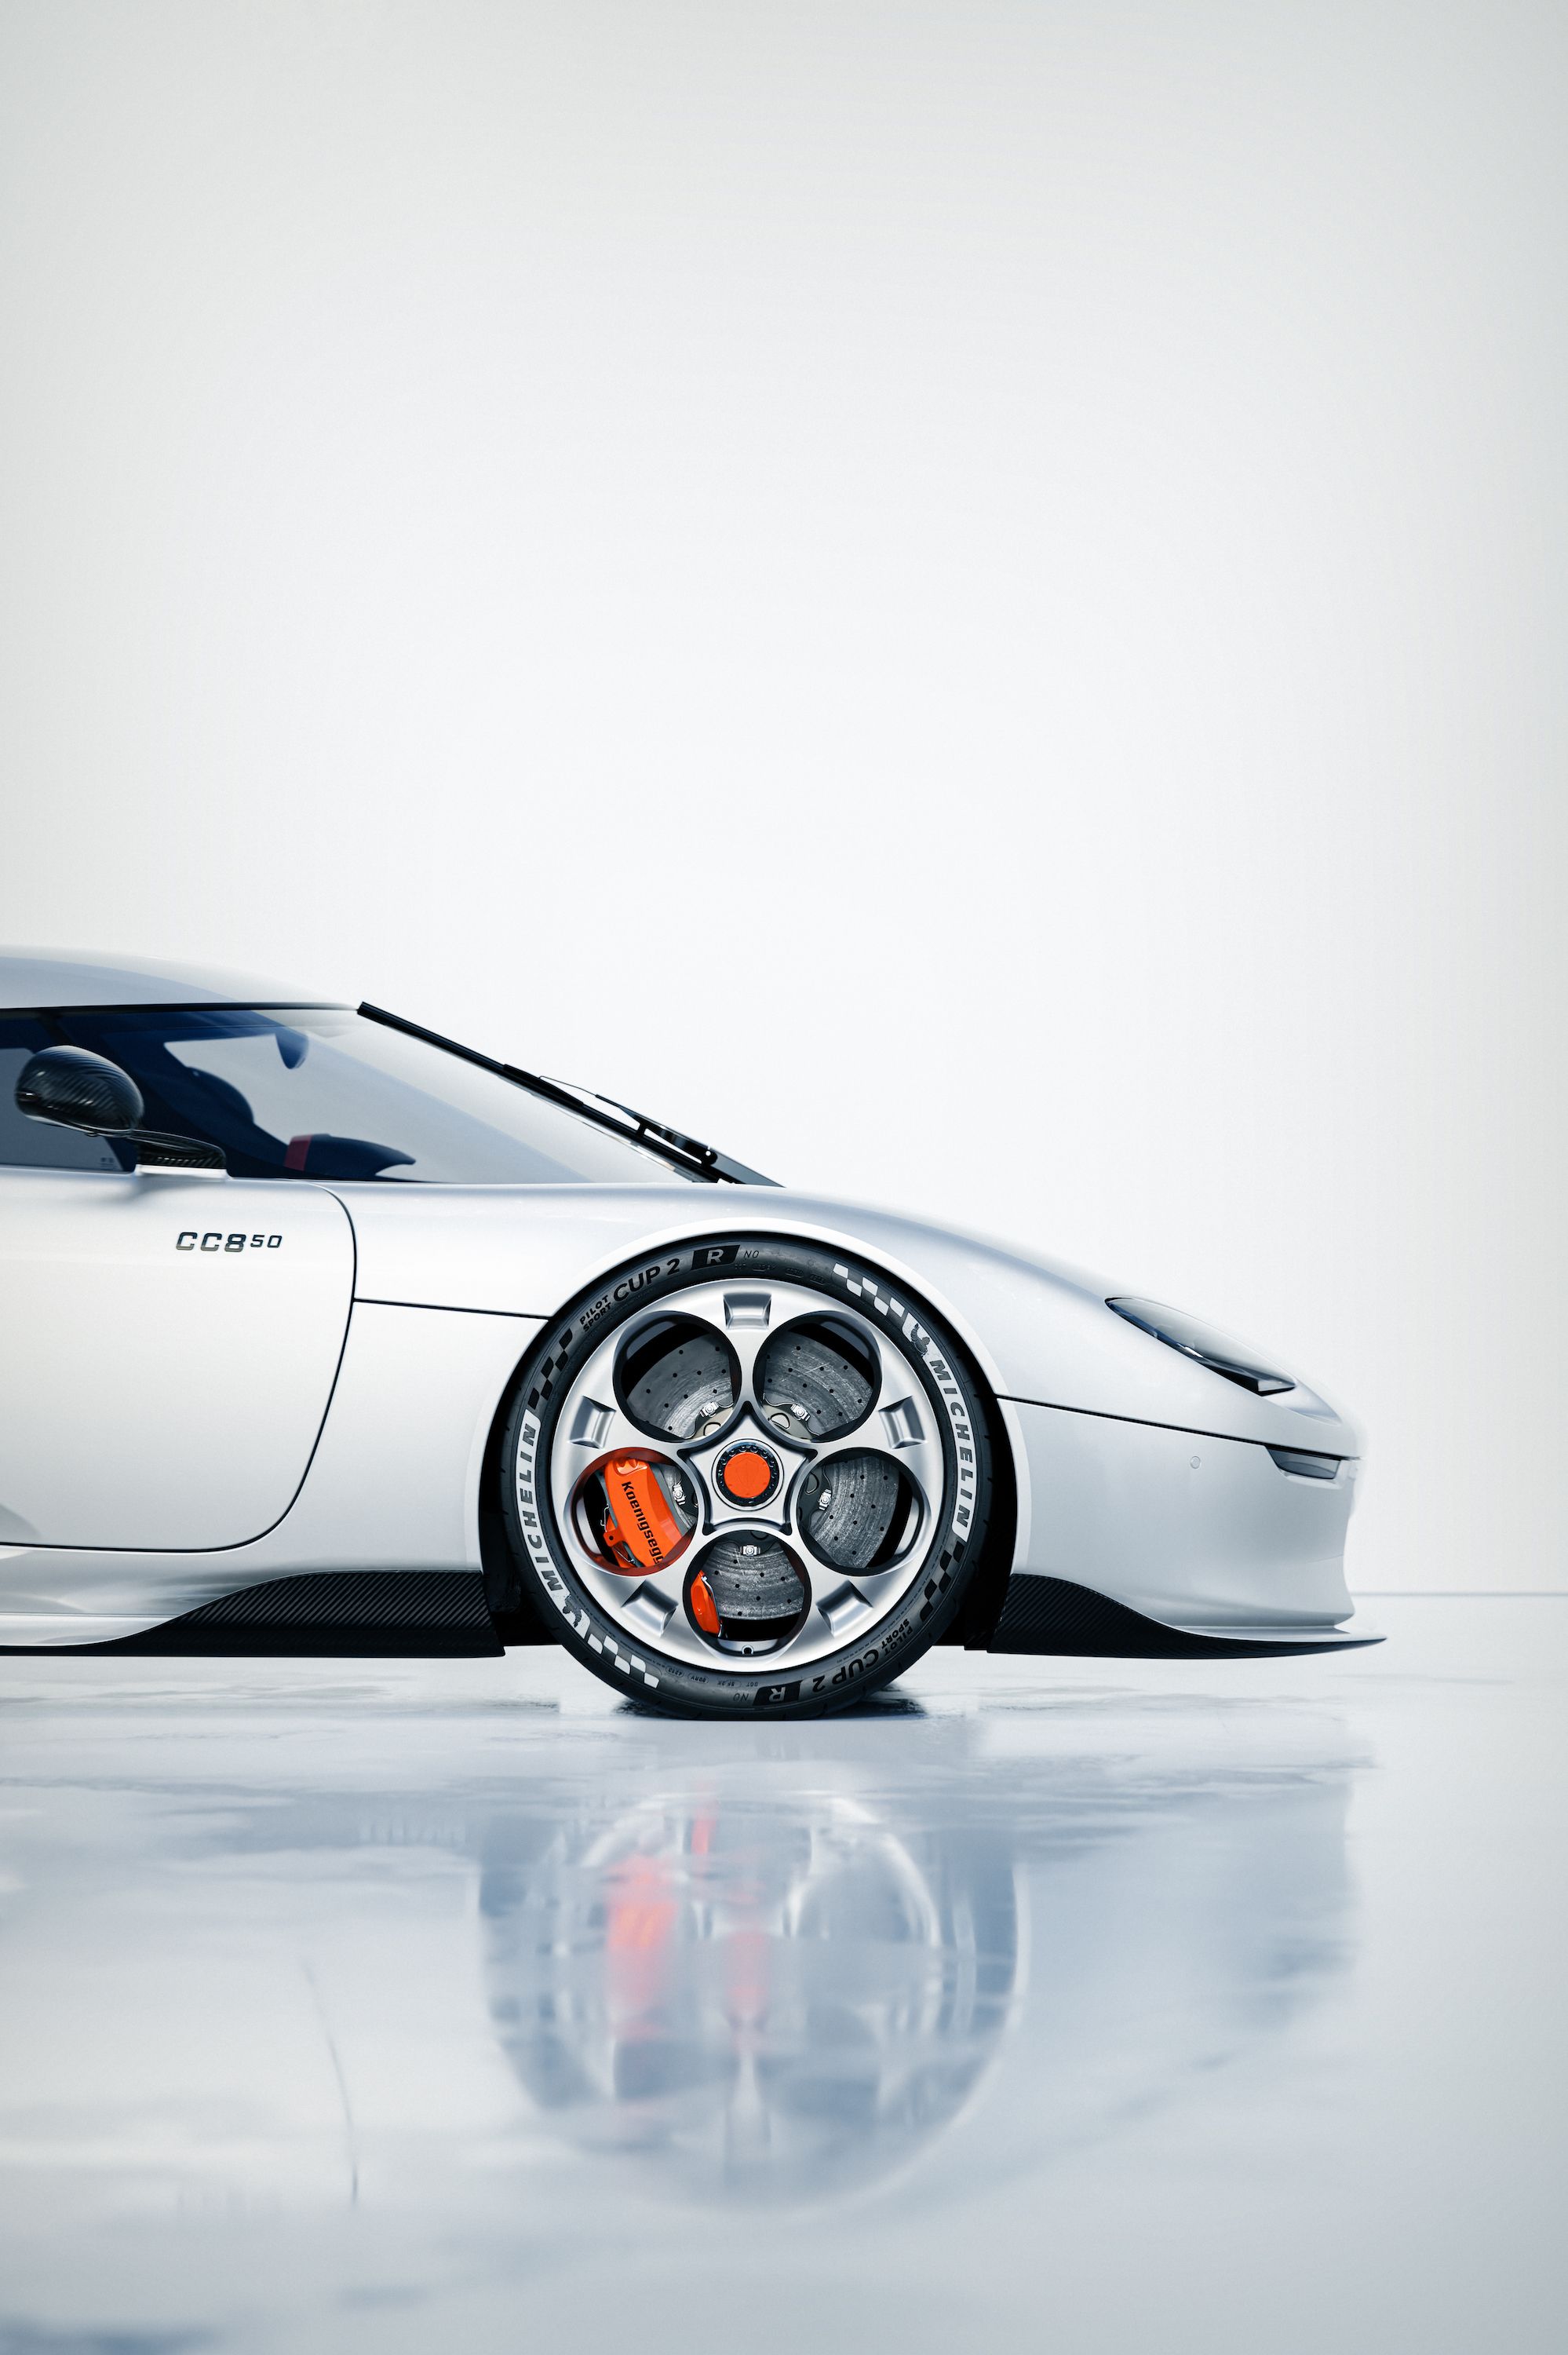 The 1385-HP Koenigsegg CC850 Has a Manual Transmission From the Future